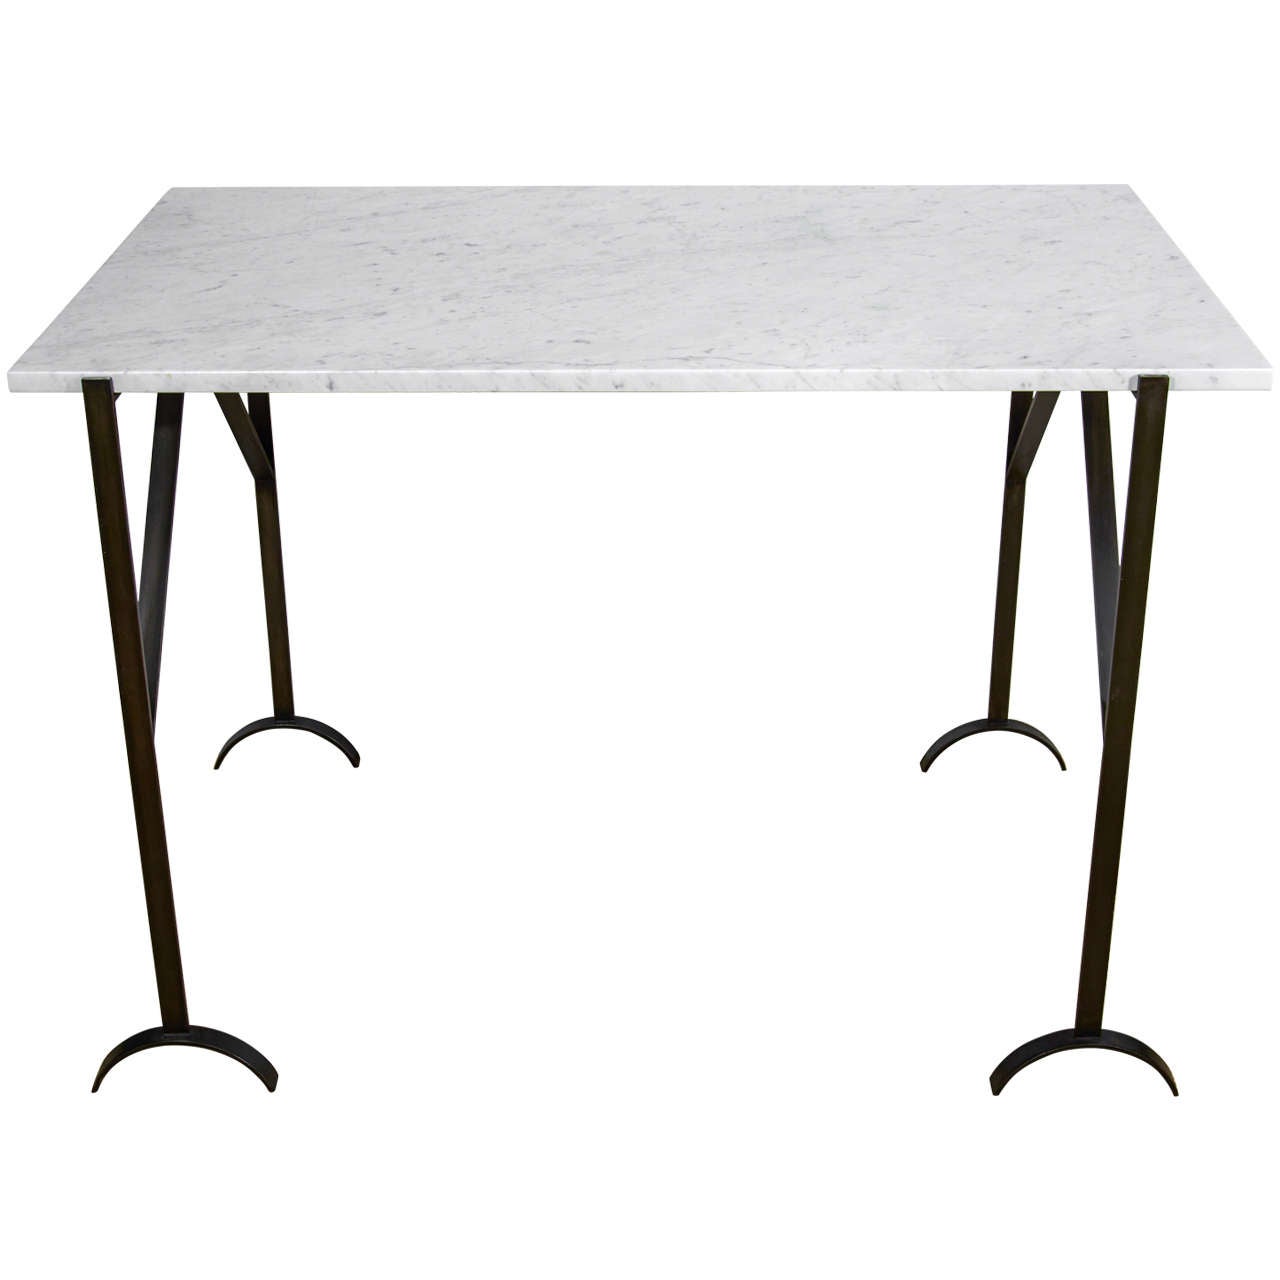 A Mid Century Marble and Steel Trestle Table